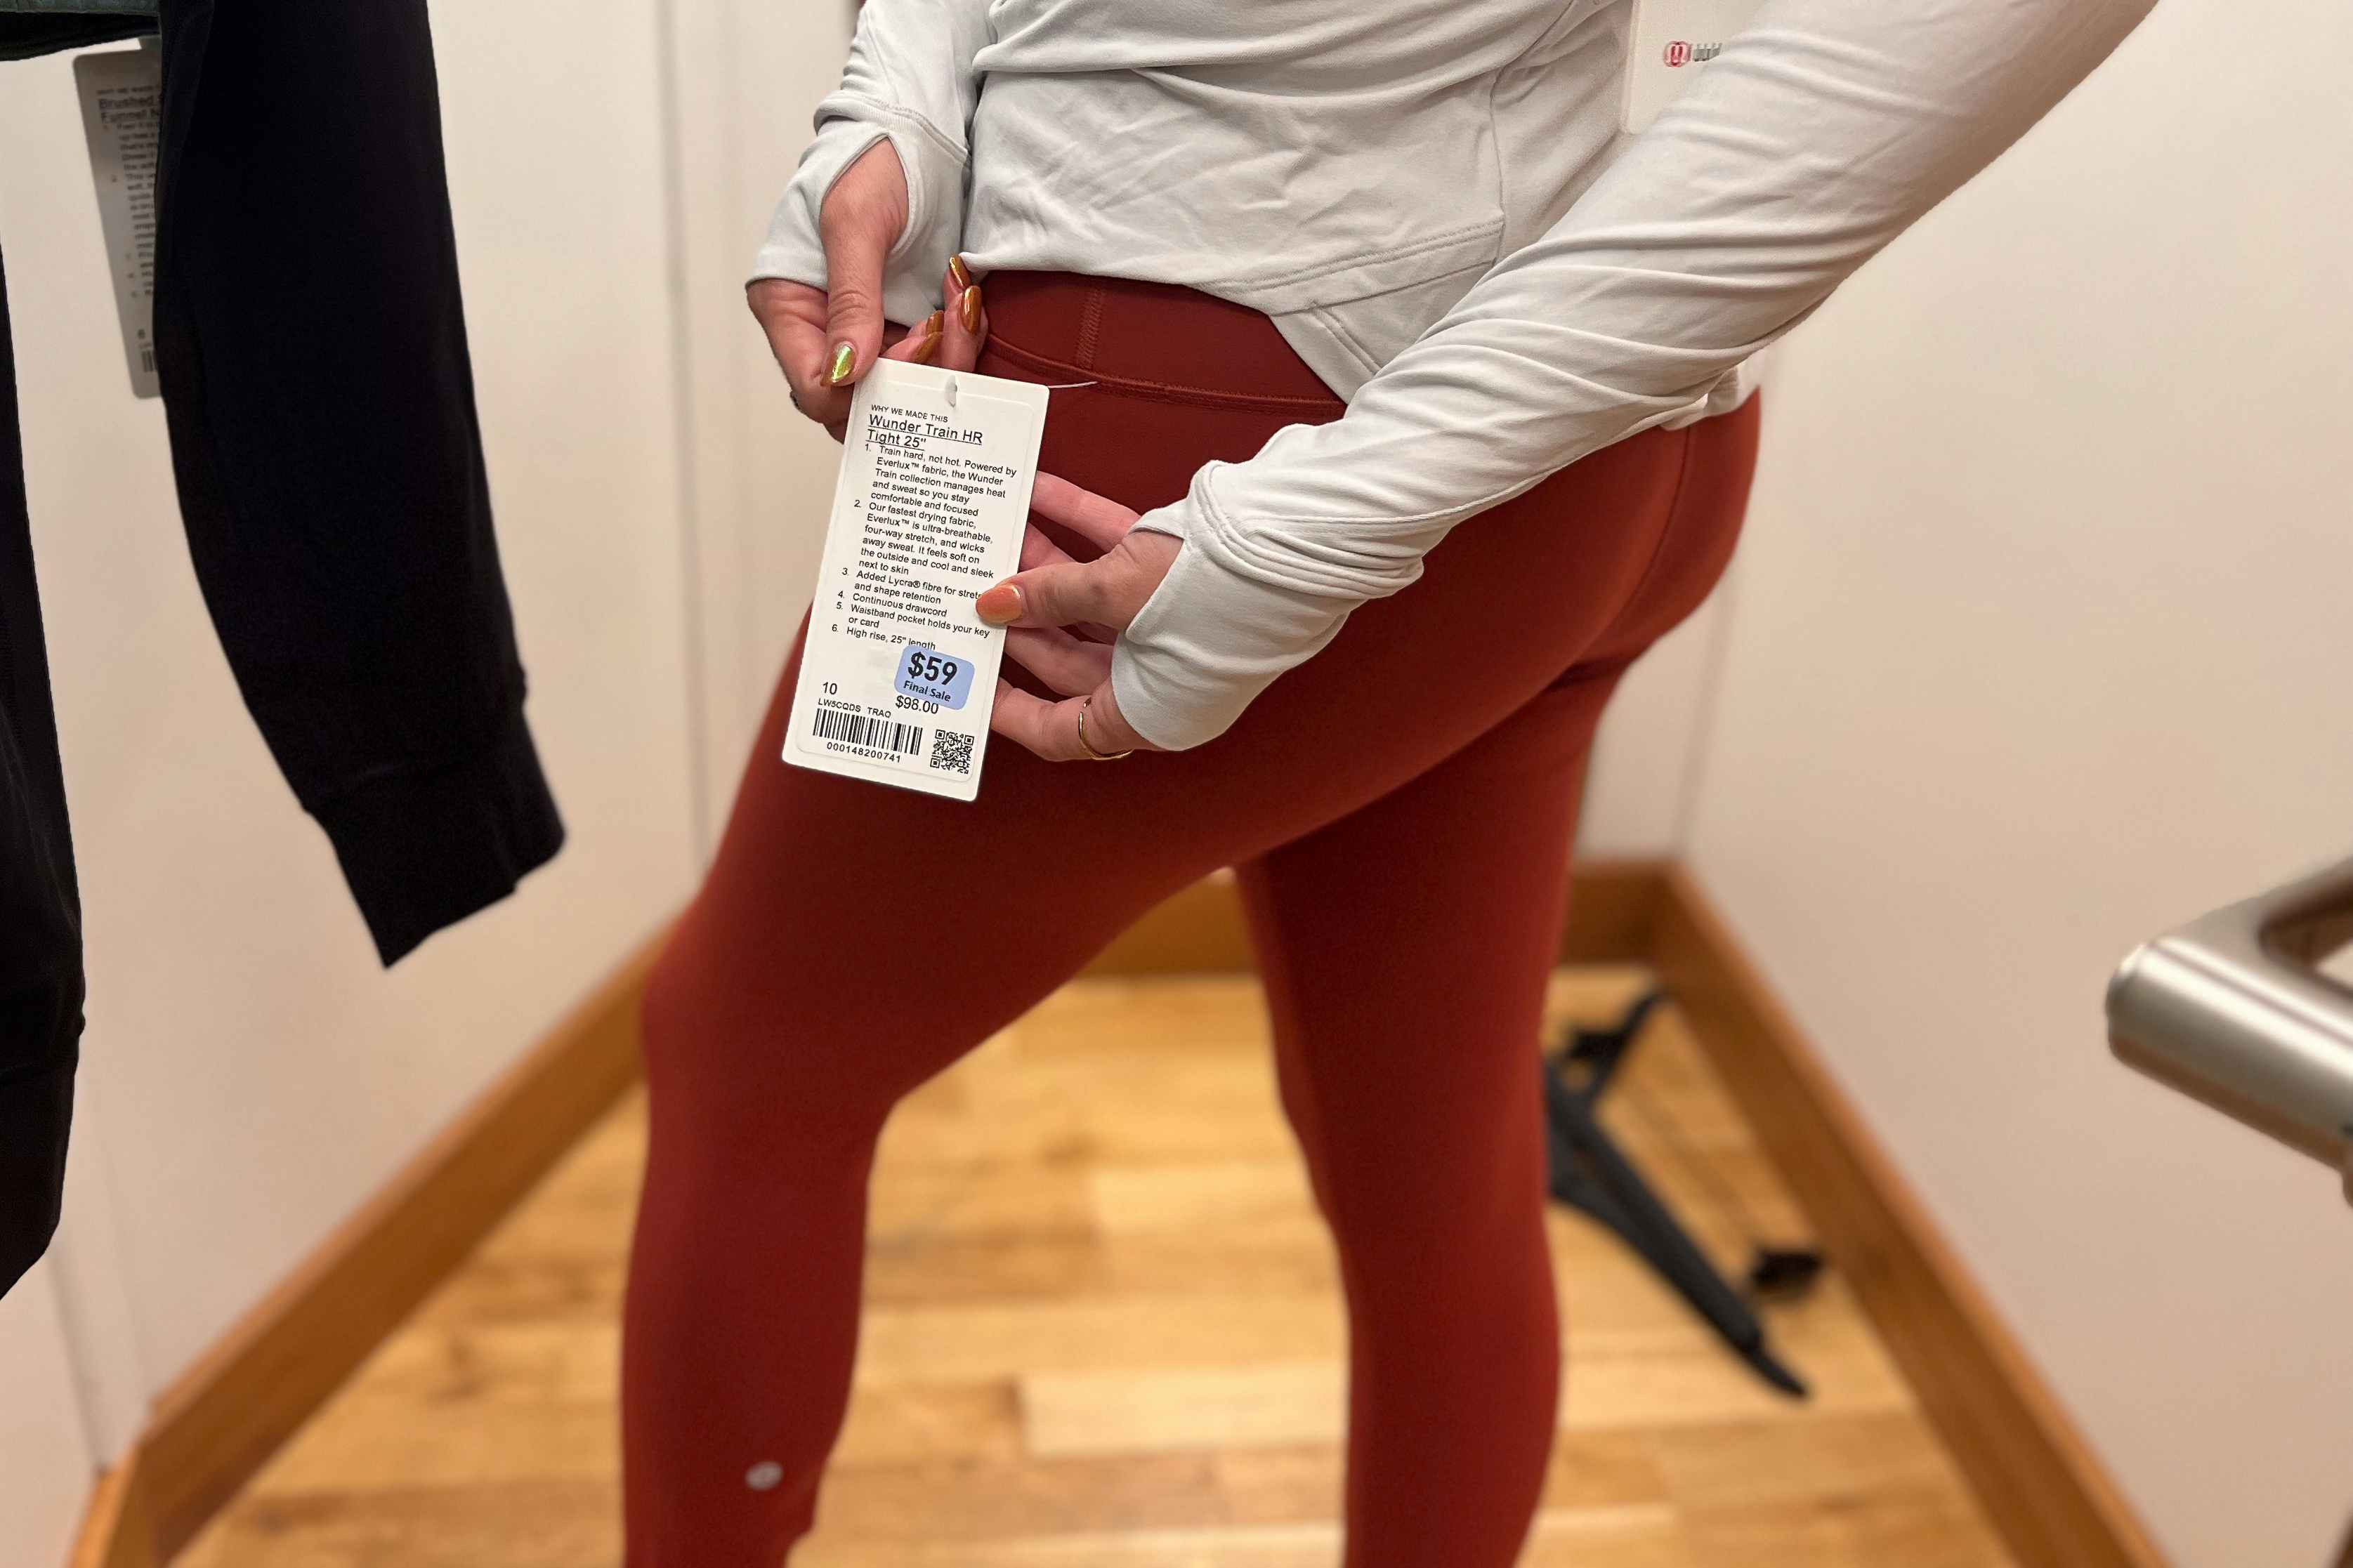 model trying on leggings showing the price tag